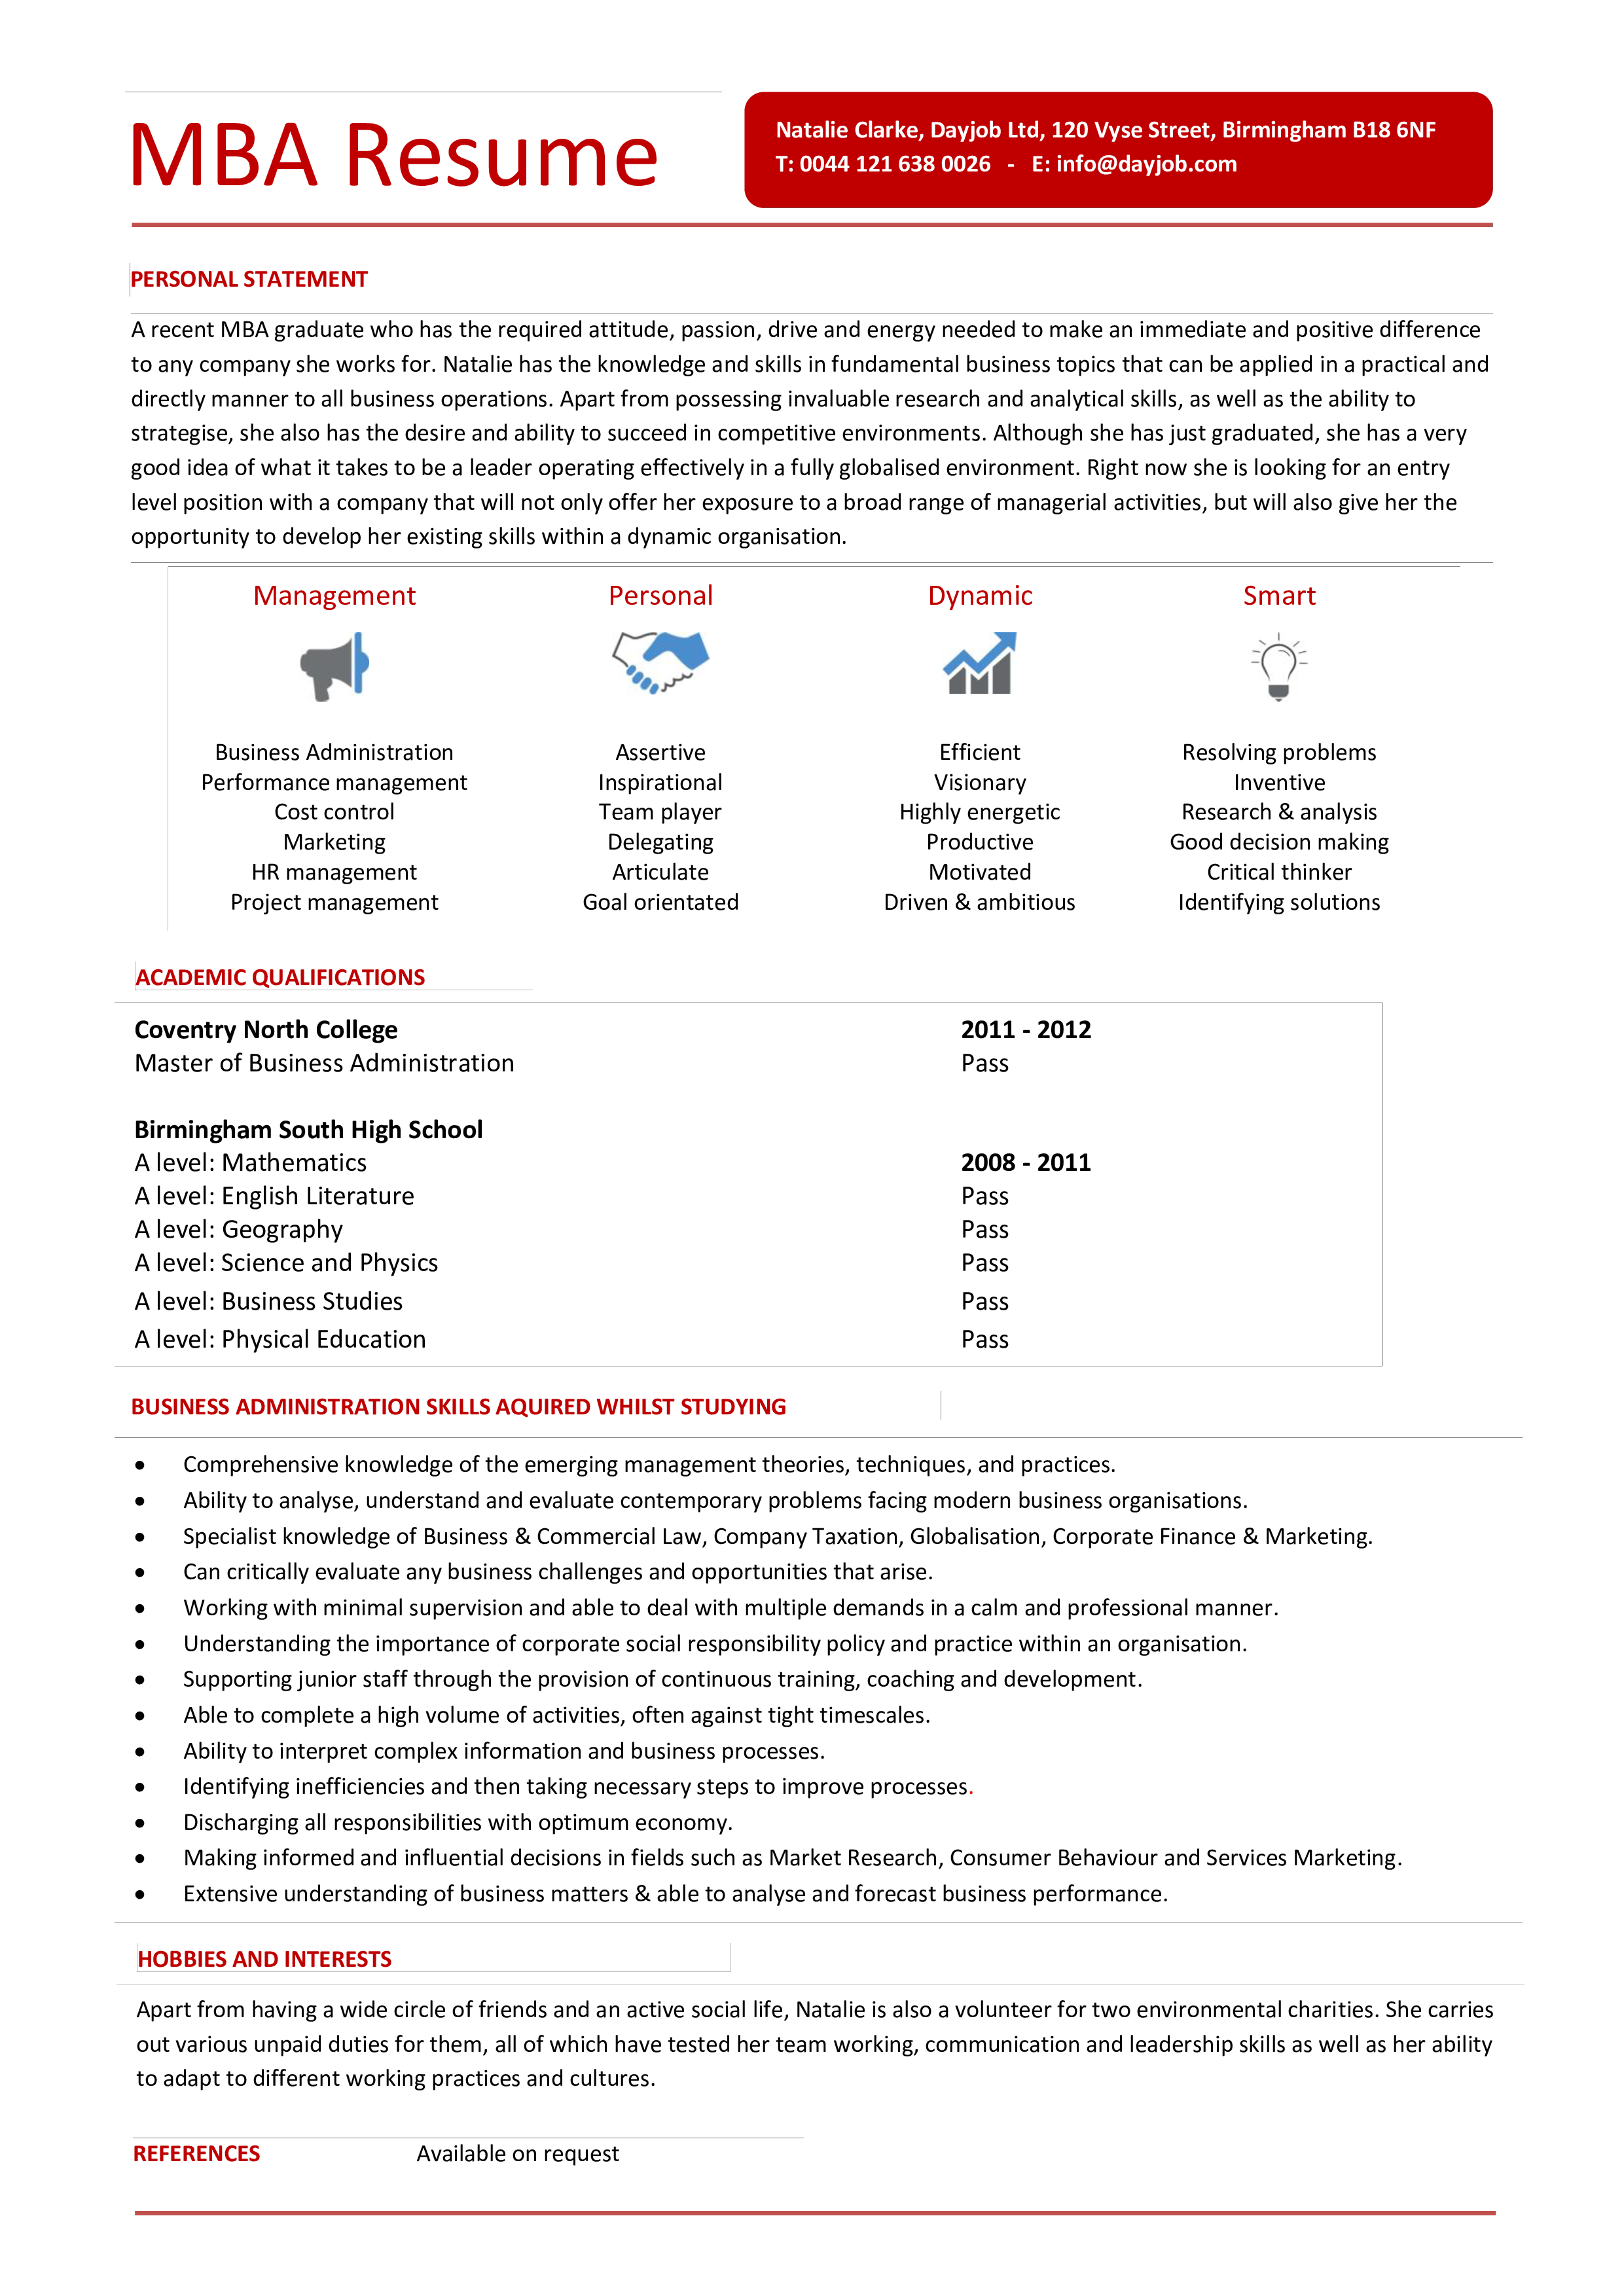 MBA Resume Example Templates at